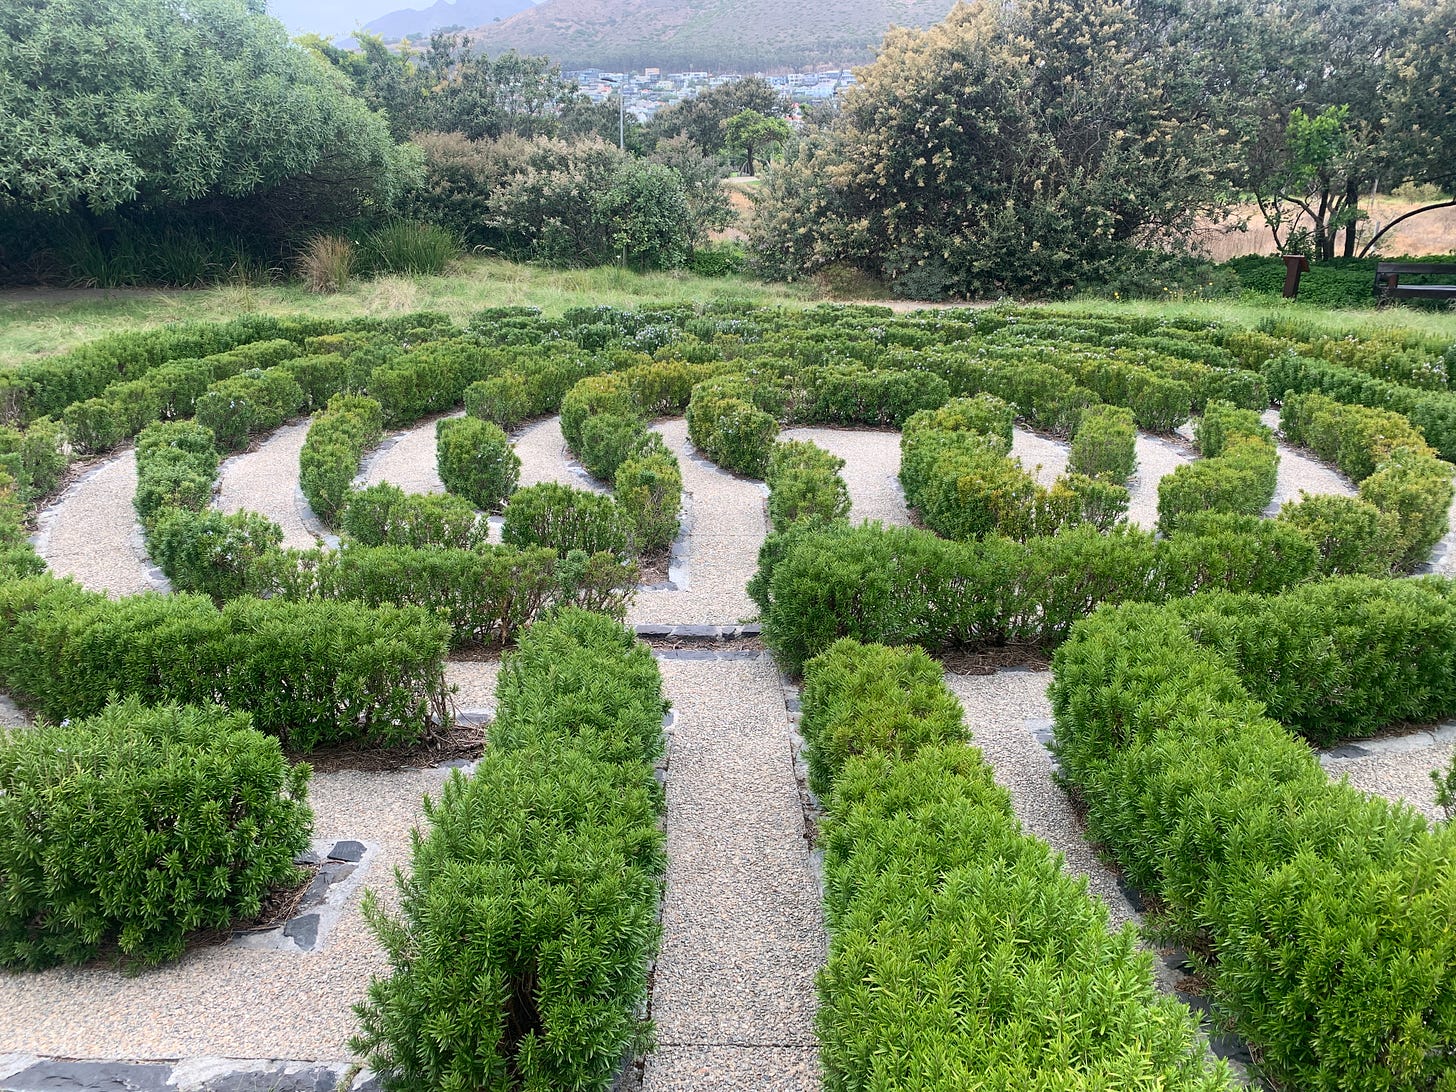 A labyrinth, constructed with gravel path in winding spirals and rosemary bushes as the labyrinth divider